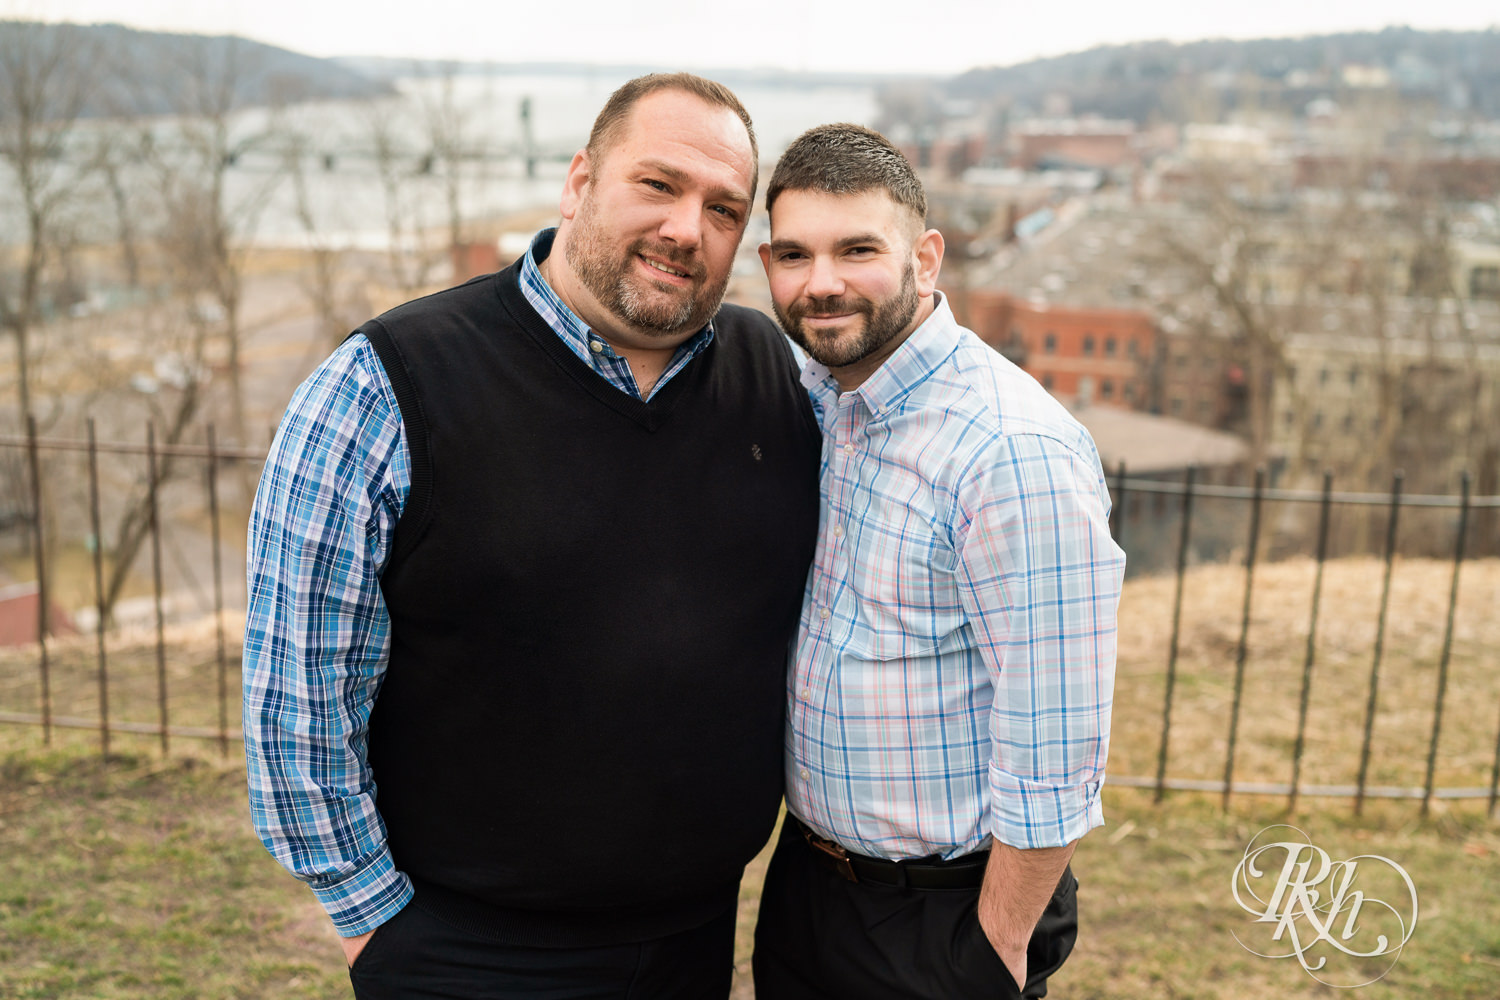 Two men in plaid shirts smile at each other during engagement photography in Stillwater, Minnesota.